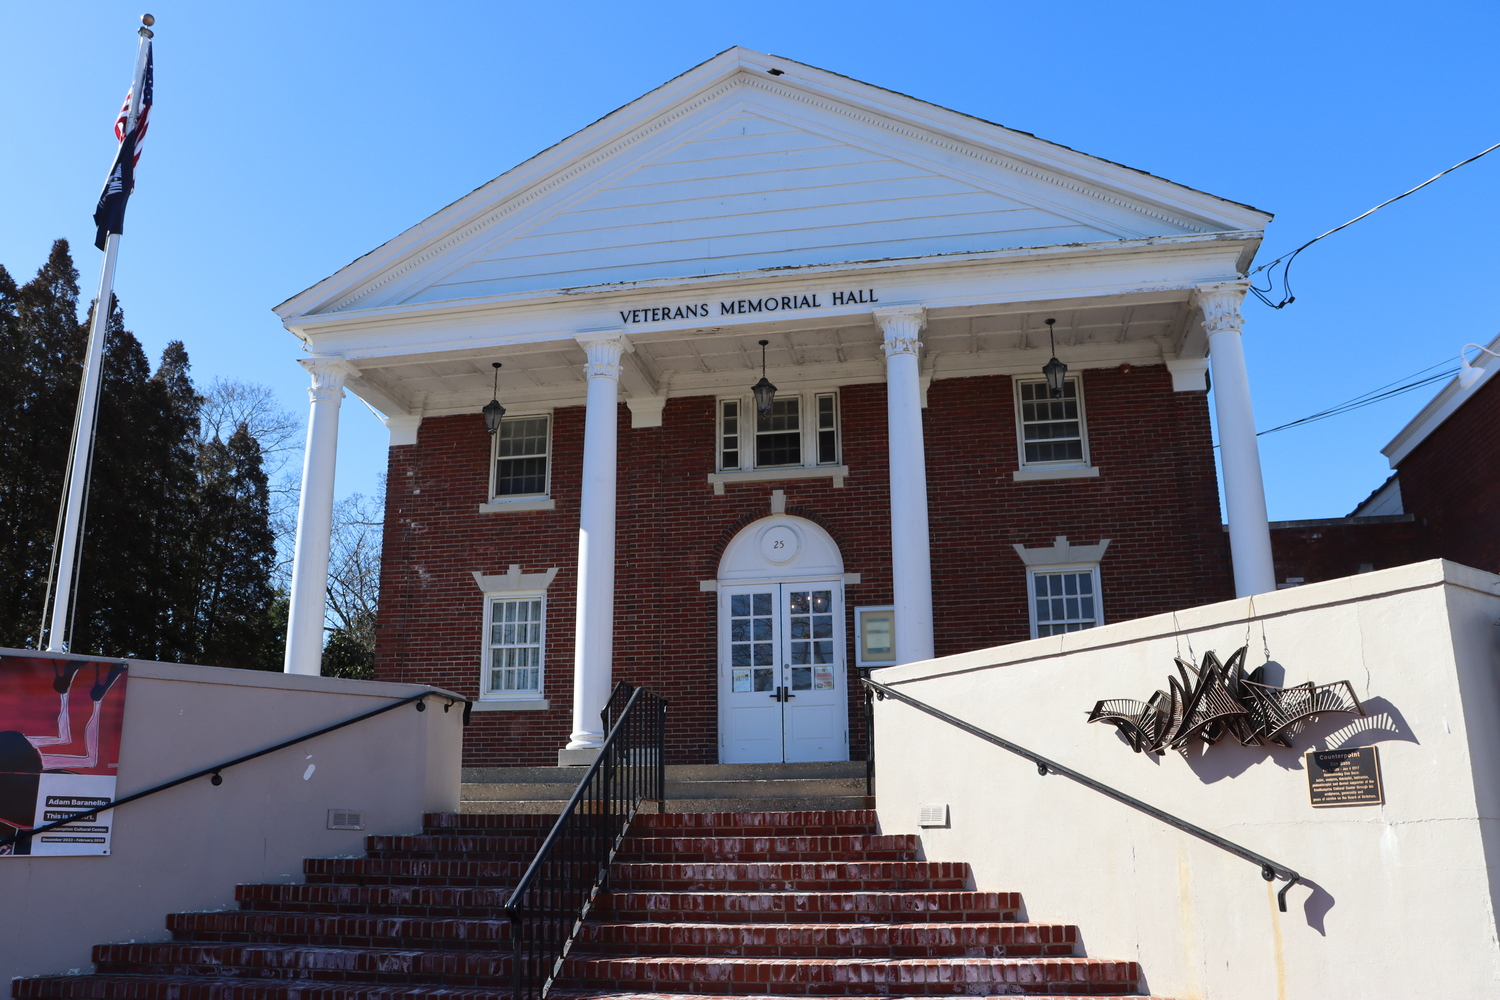 Veterans Hall in Southampton Village is getting some much needed upgrades and repairs. New flooring was recently installed inside and upgrades were made to the bathrooms it shares with the Southampton Cultural Center. More upgrades are planned for the spring. CAILIN RILEY